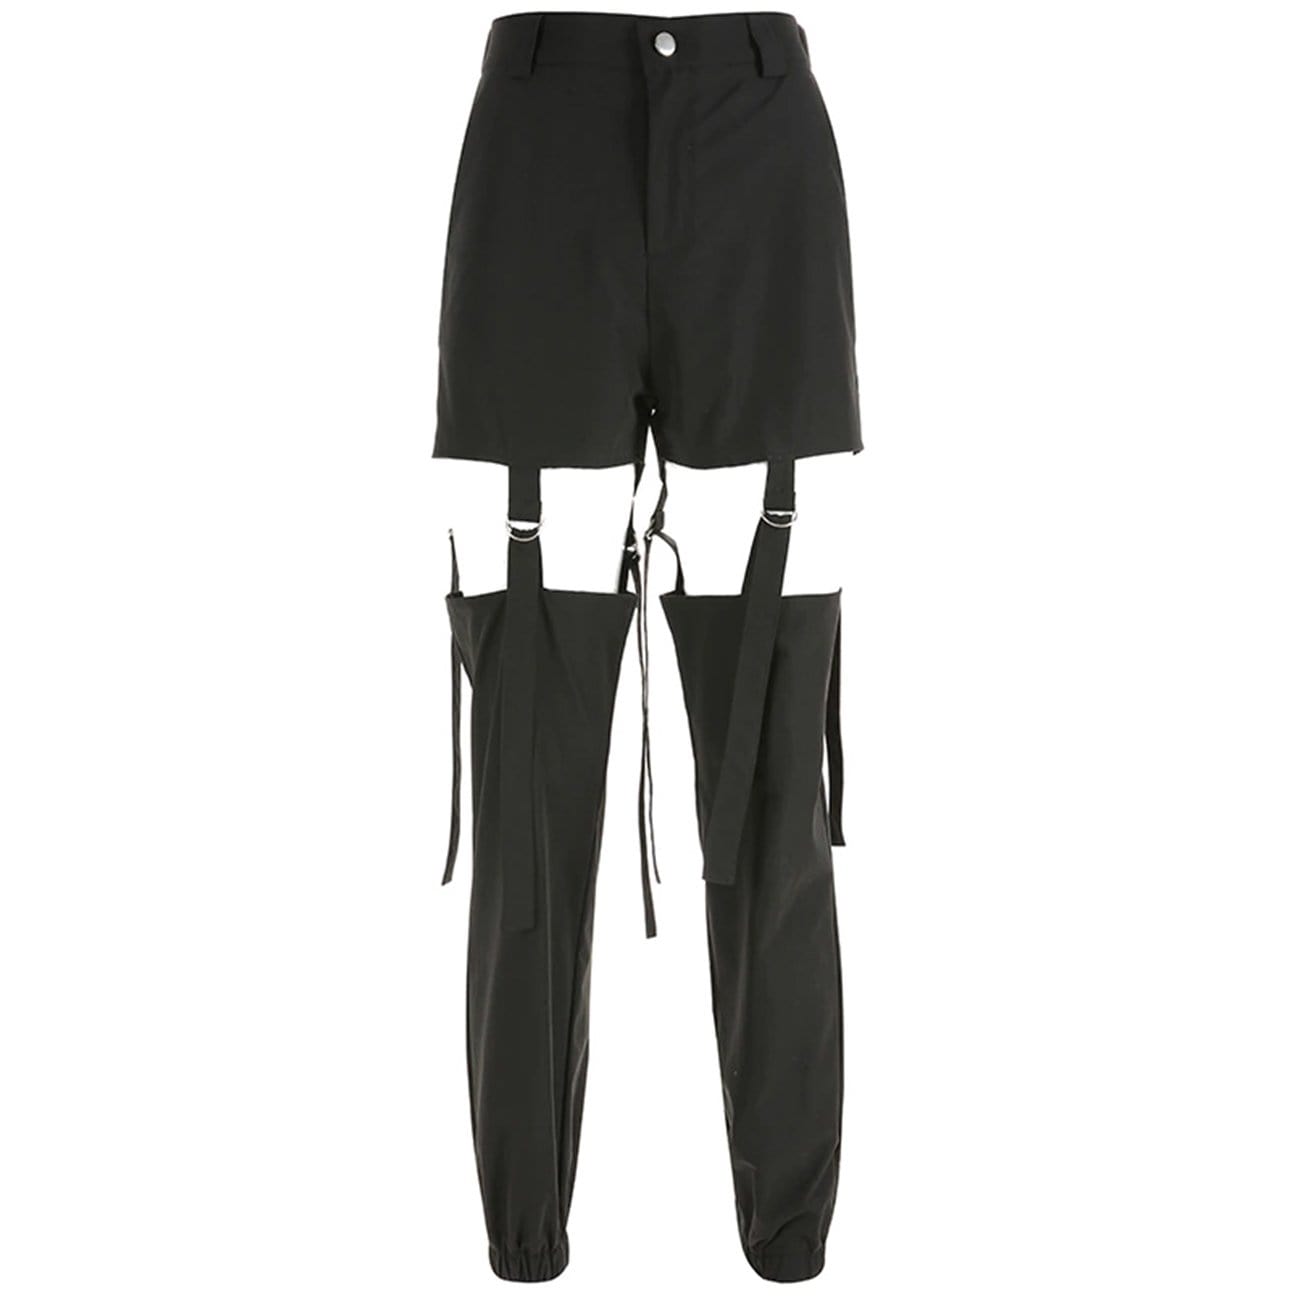 WLS Function Punk Hollow Out Ribbons Pants